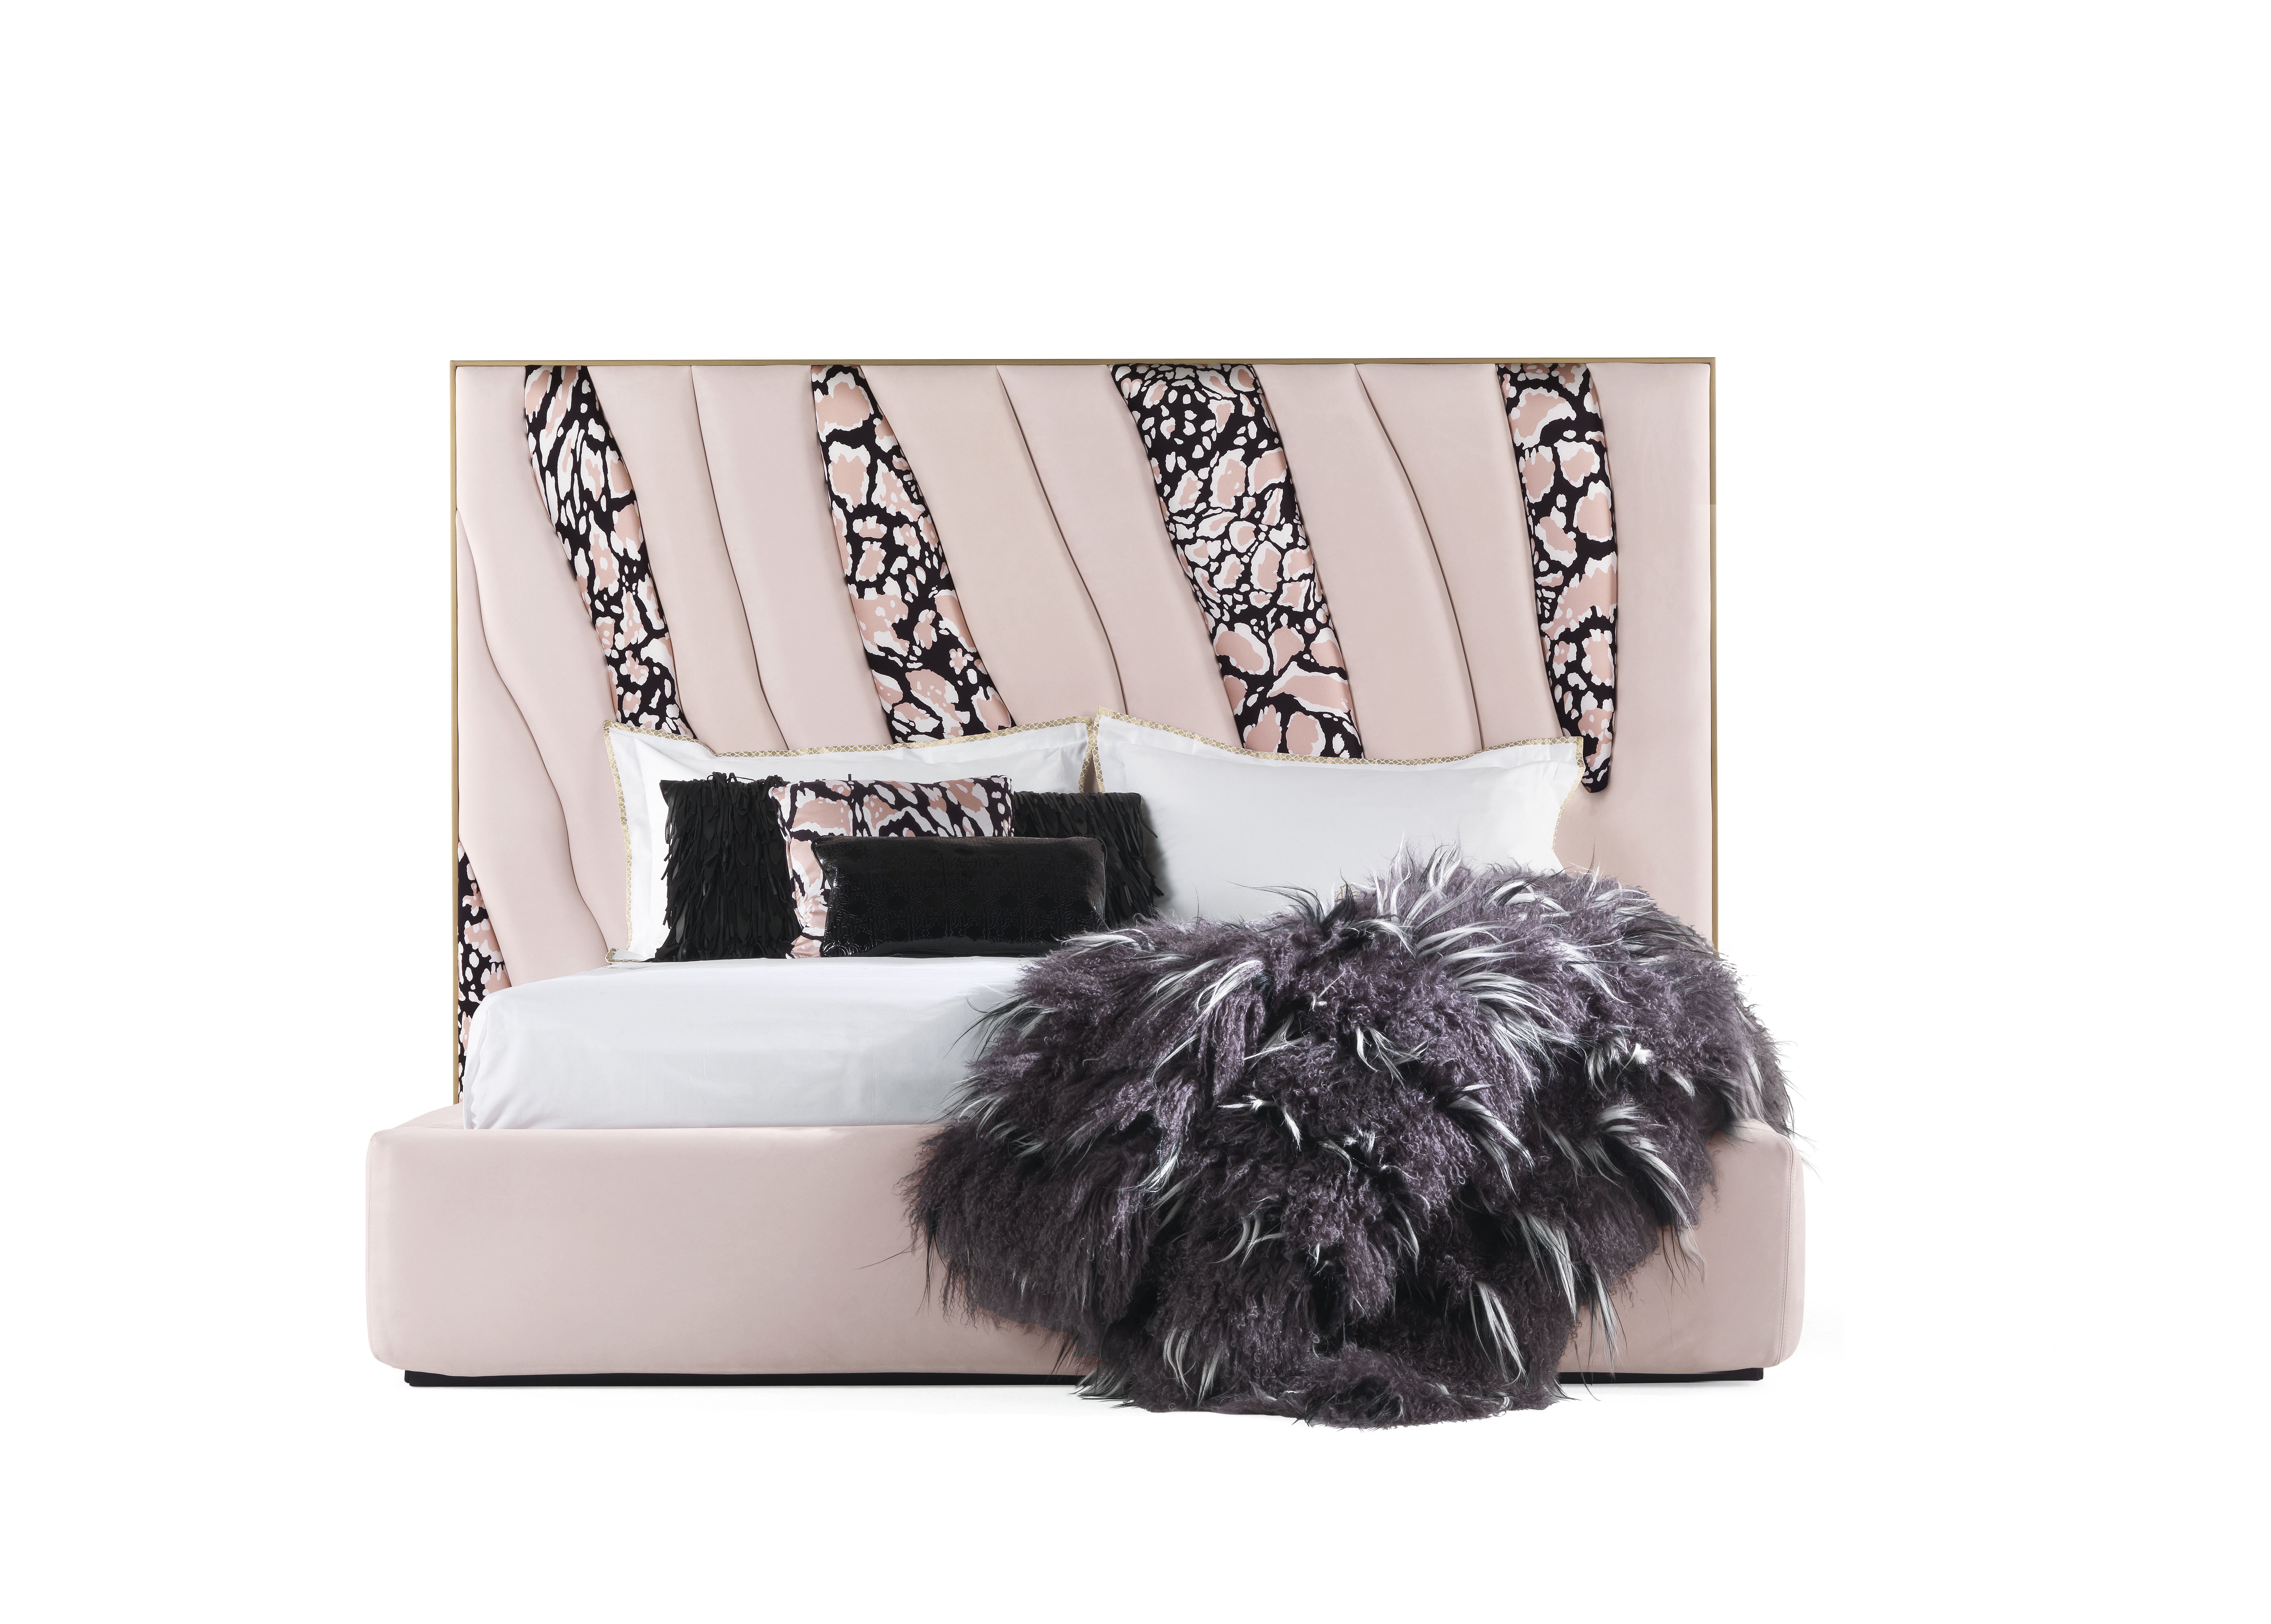 21st Century Sahara4 Bed in Fabric and Leather by Roberto Cavalli Home Interiors